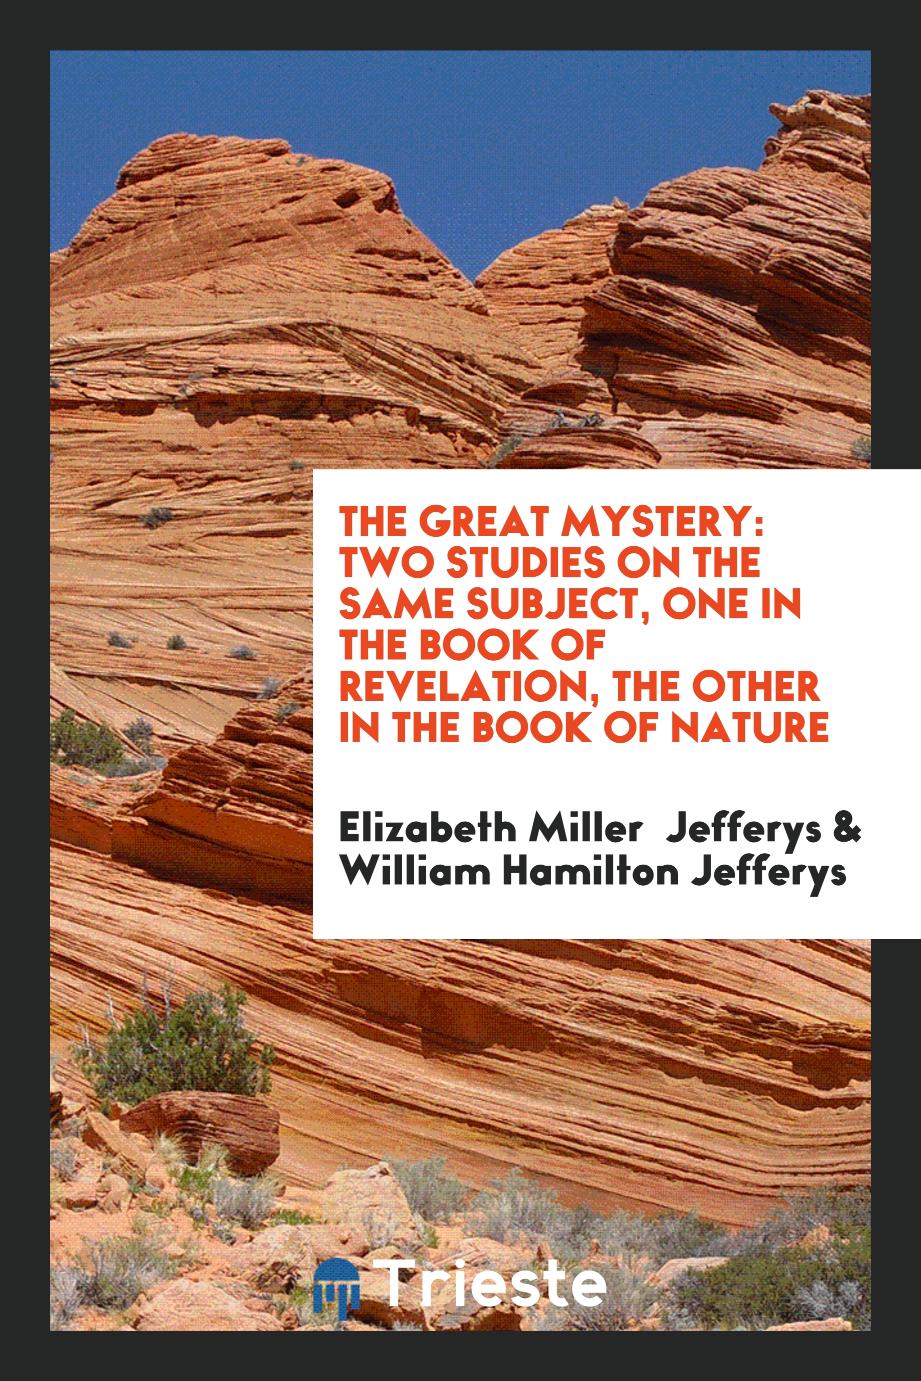 The Great Mystery: Two Studies on the Same Subject, One in the Book of Revelation, the Other in the Book of Nature